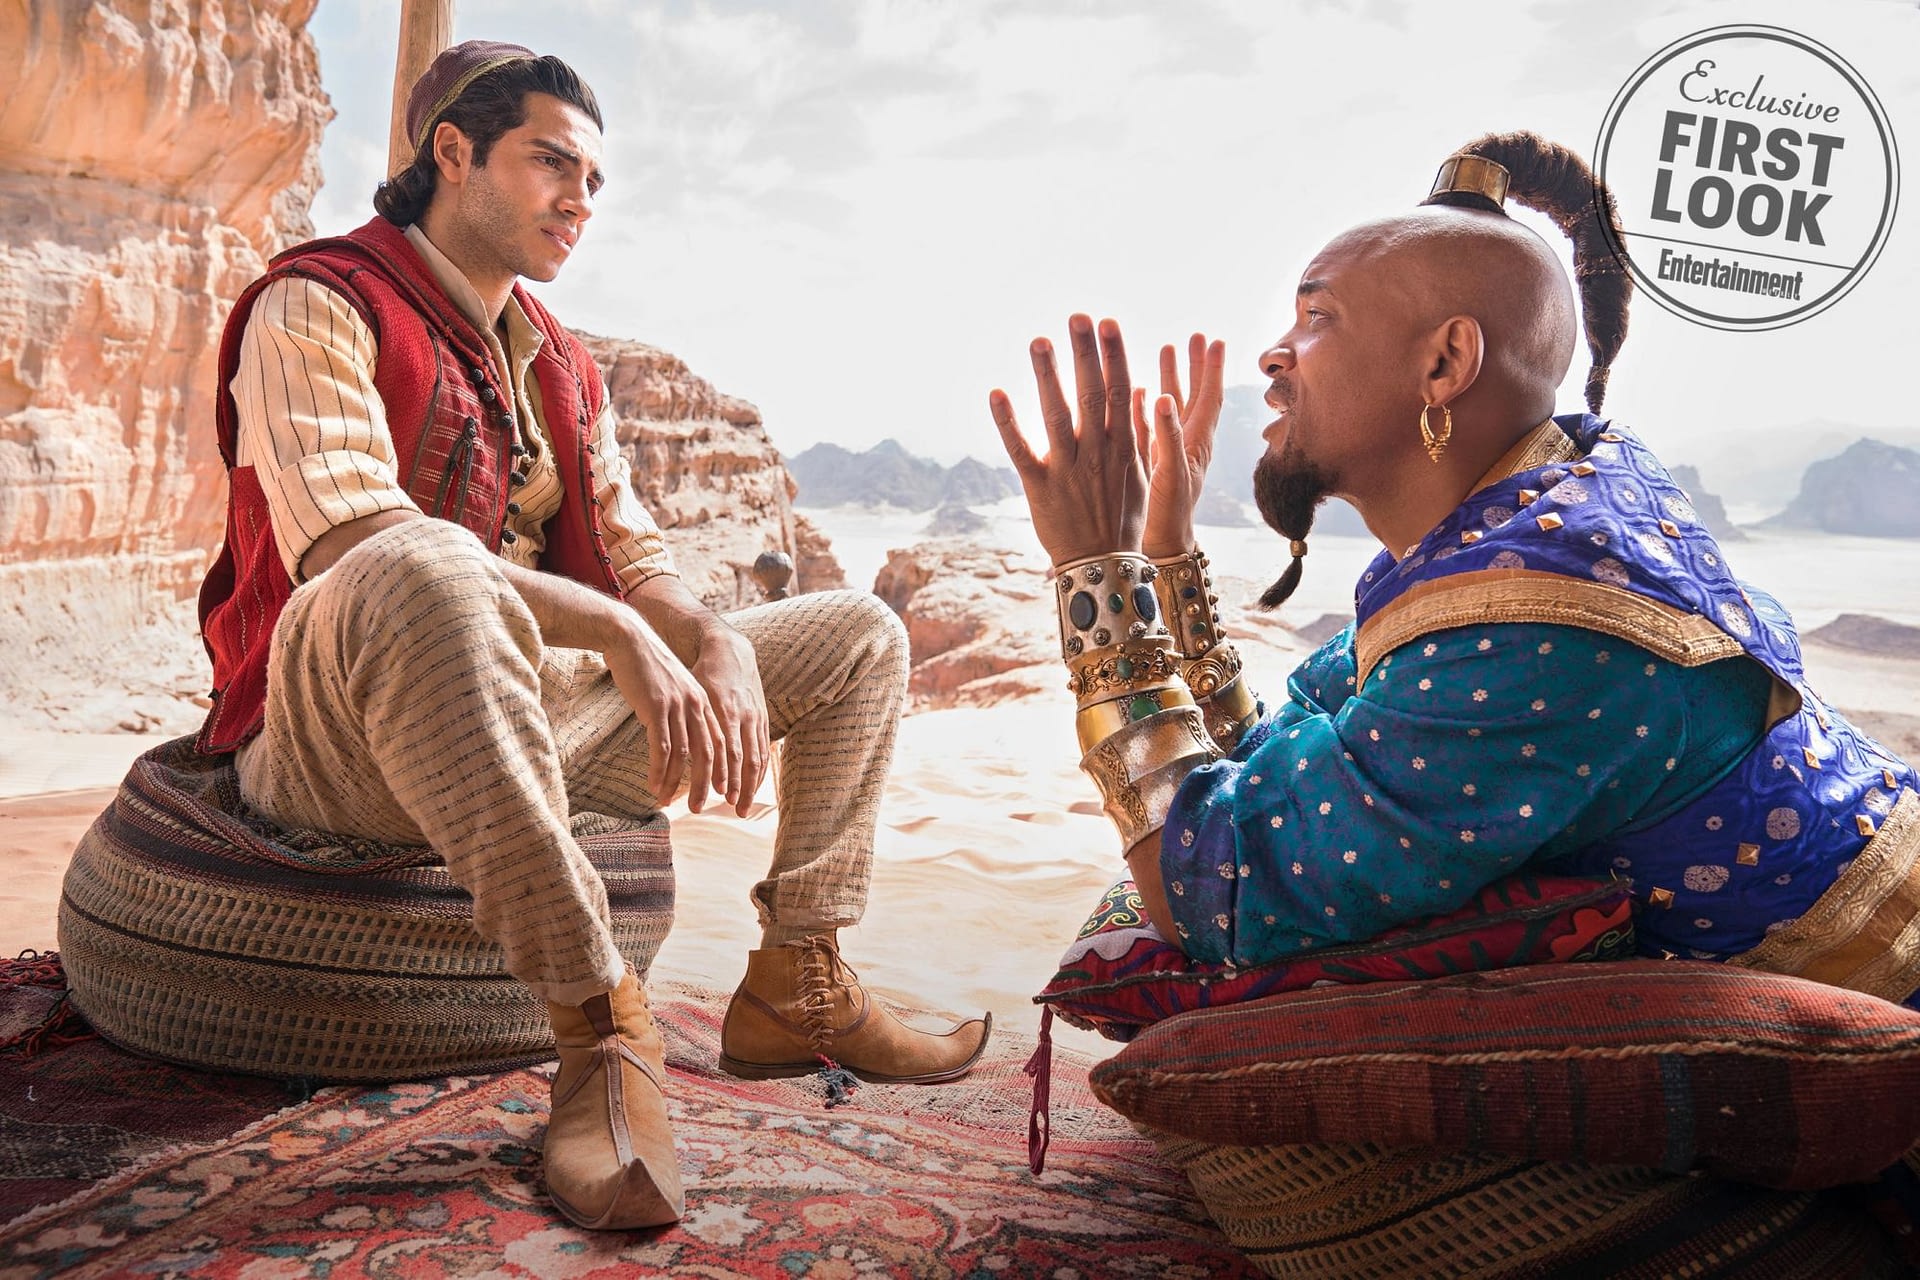 A New Trailer For The Live Action Remake Of Aladdin Will Drop Tomorrow